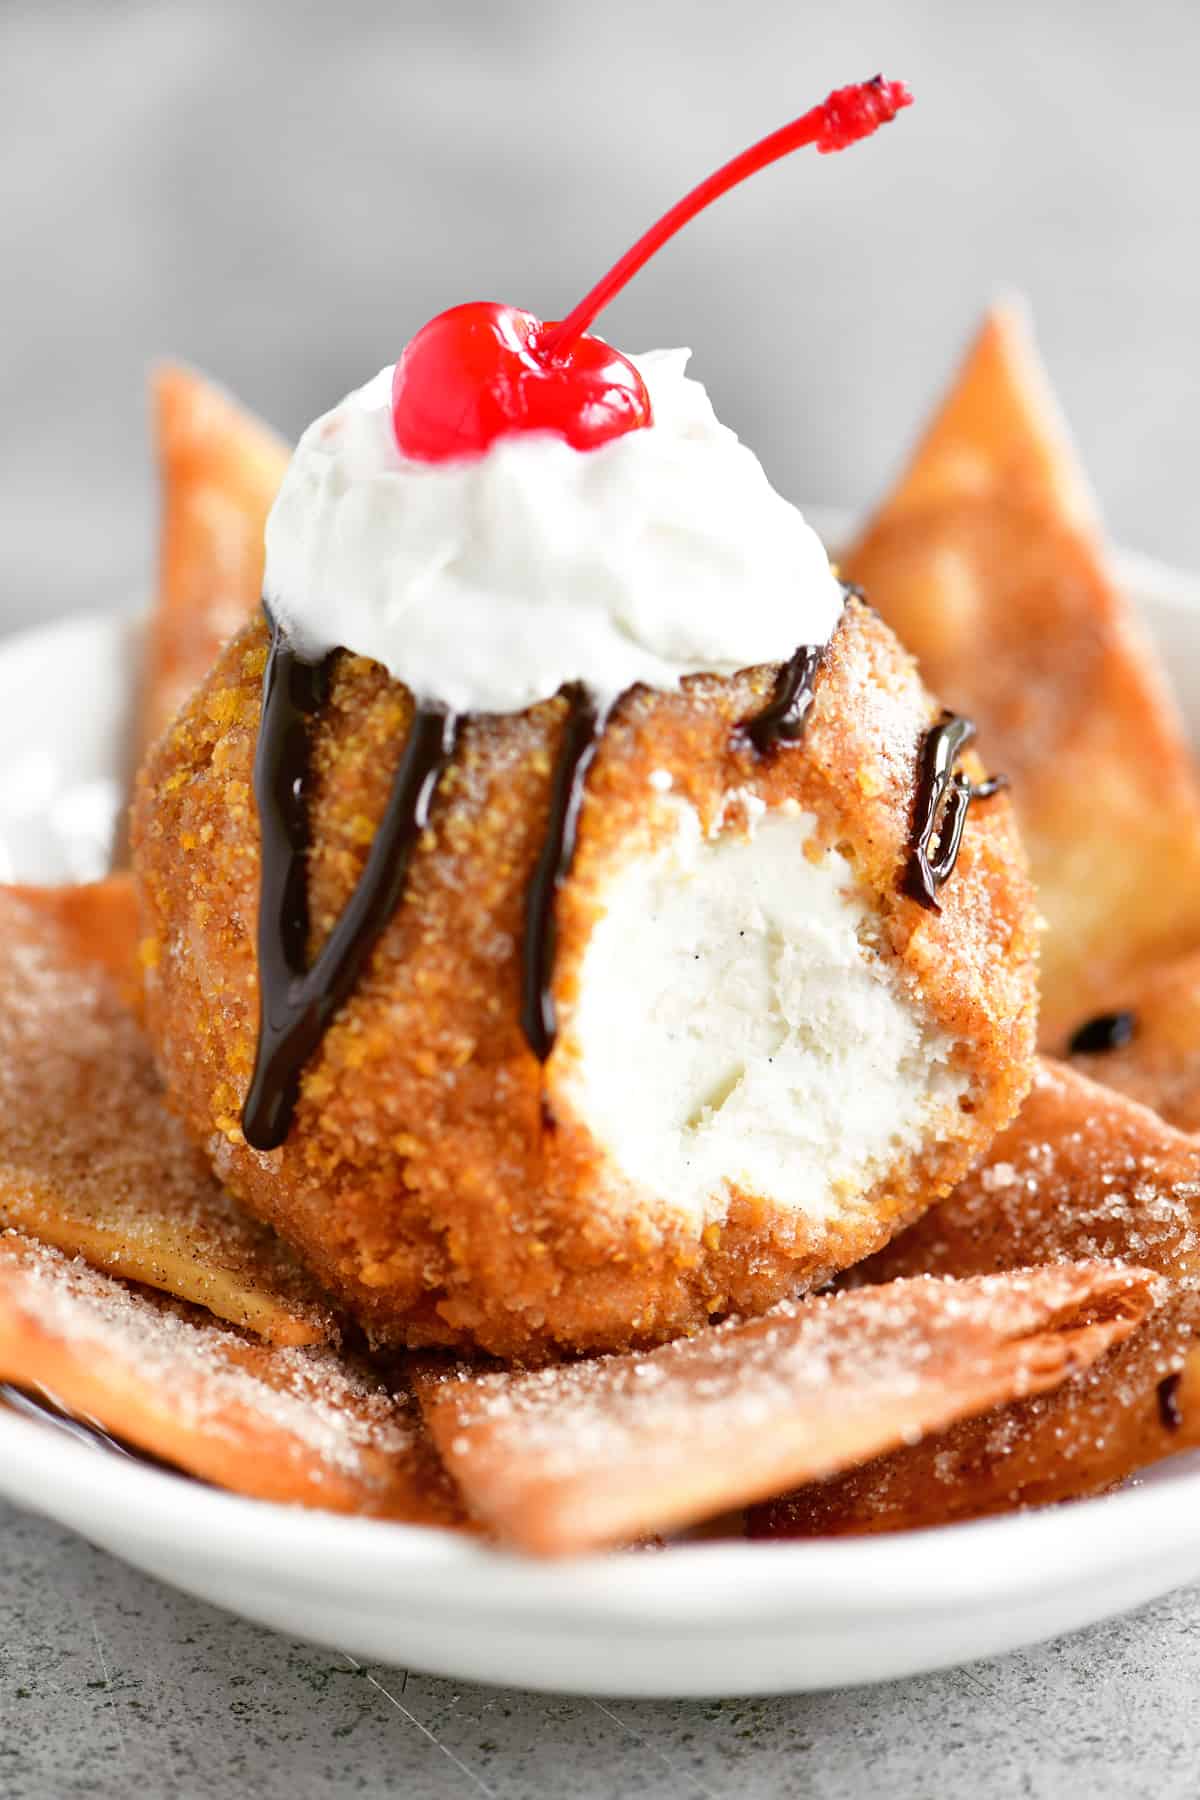 fried ice cream drizzled in chocolate sauce